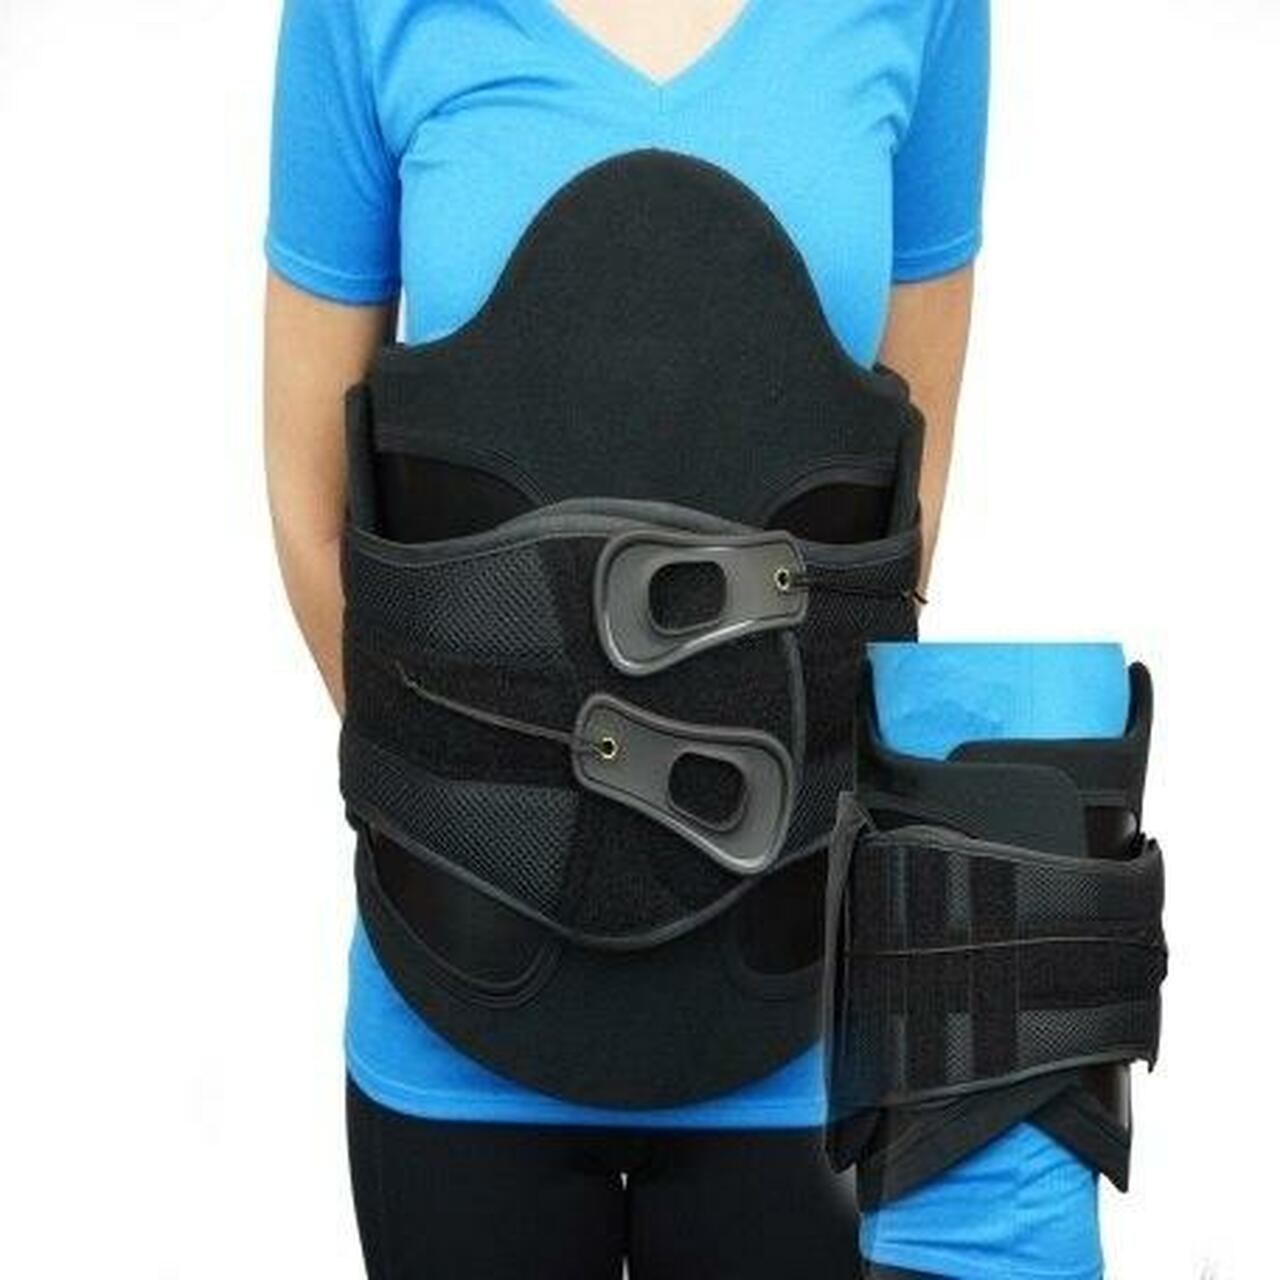 How to Set Up and Wear Your LSO Back Brace 